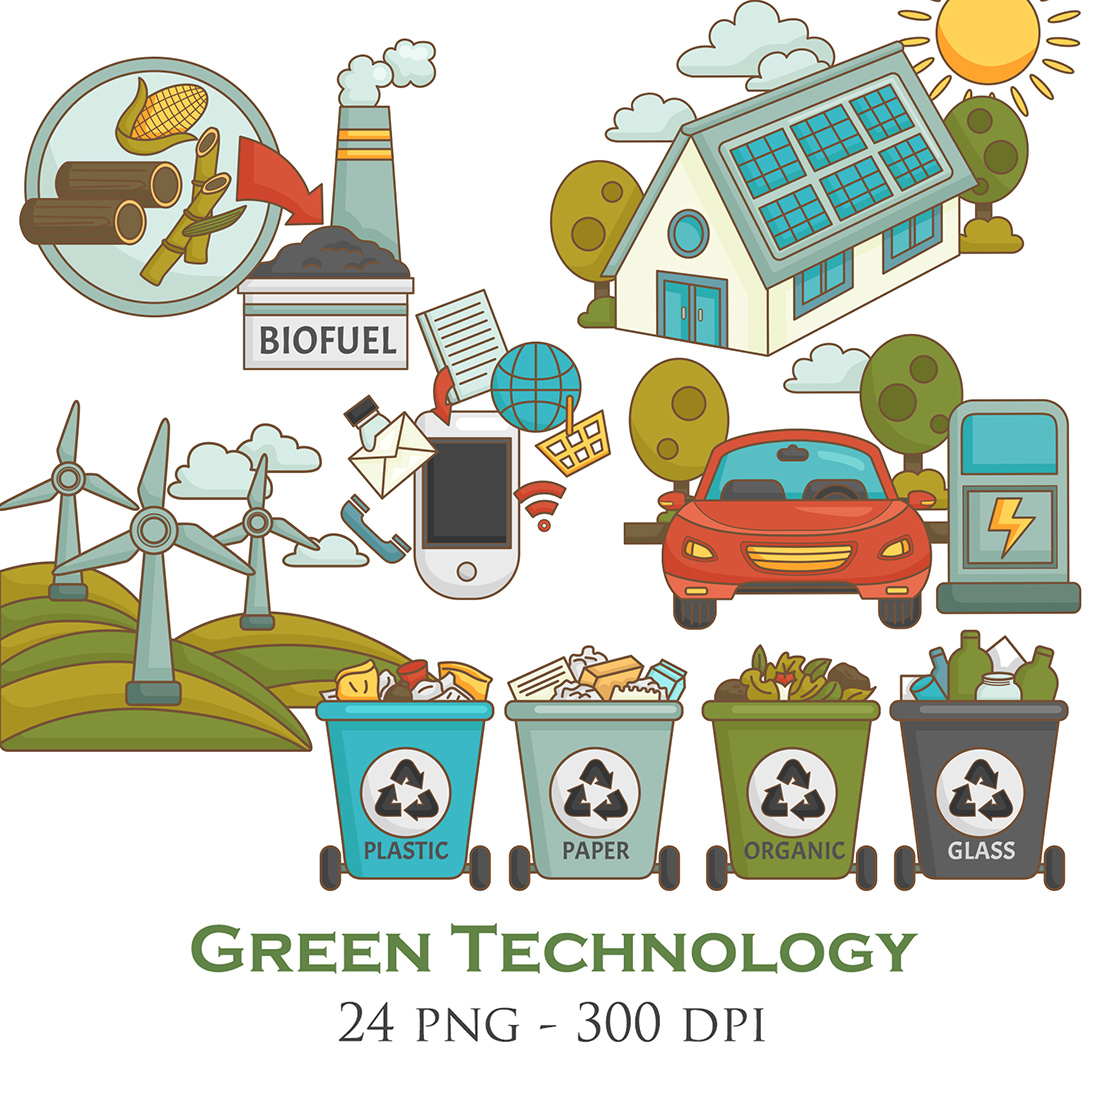 Go Green Technology Eco Friendly Environmental Energy Biofuel Electric Car Reusable Reduce Recycle Solar Panel House Wind Turbine Smartphone Used Cartoon Illustration Vector Clipart Sticker cover image.